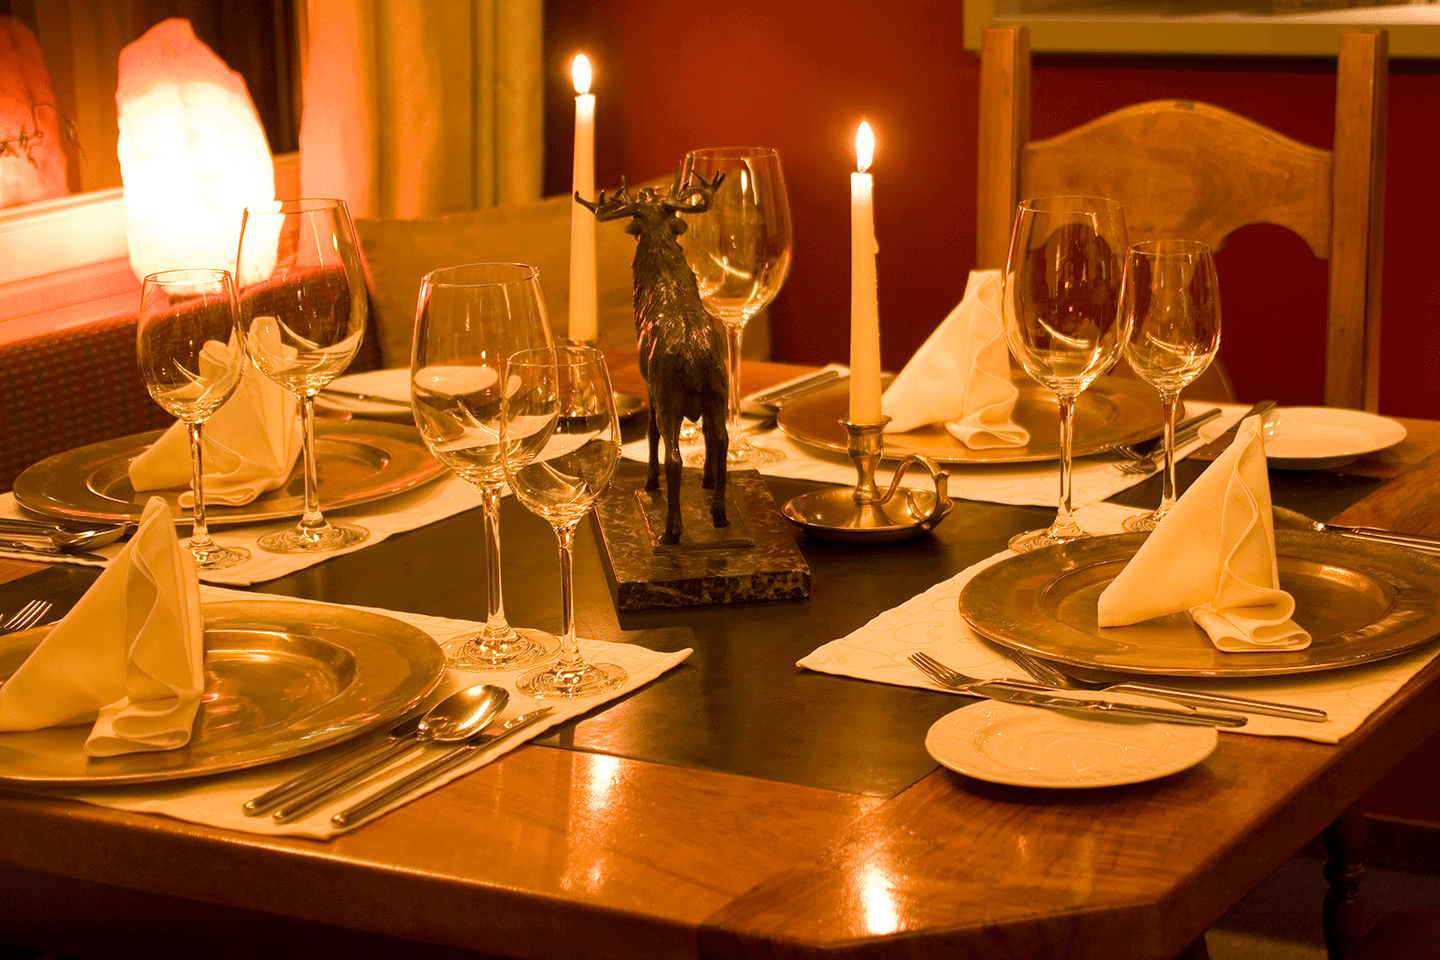 Candle lit dining table fully set with meal service for 4, including well folded napkins atop the plates.